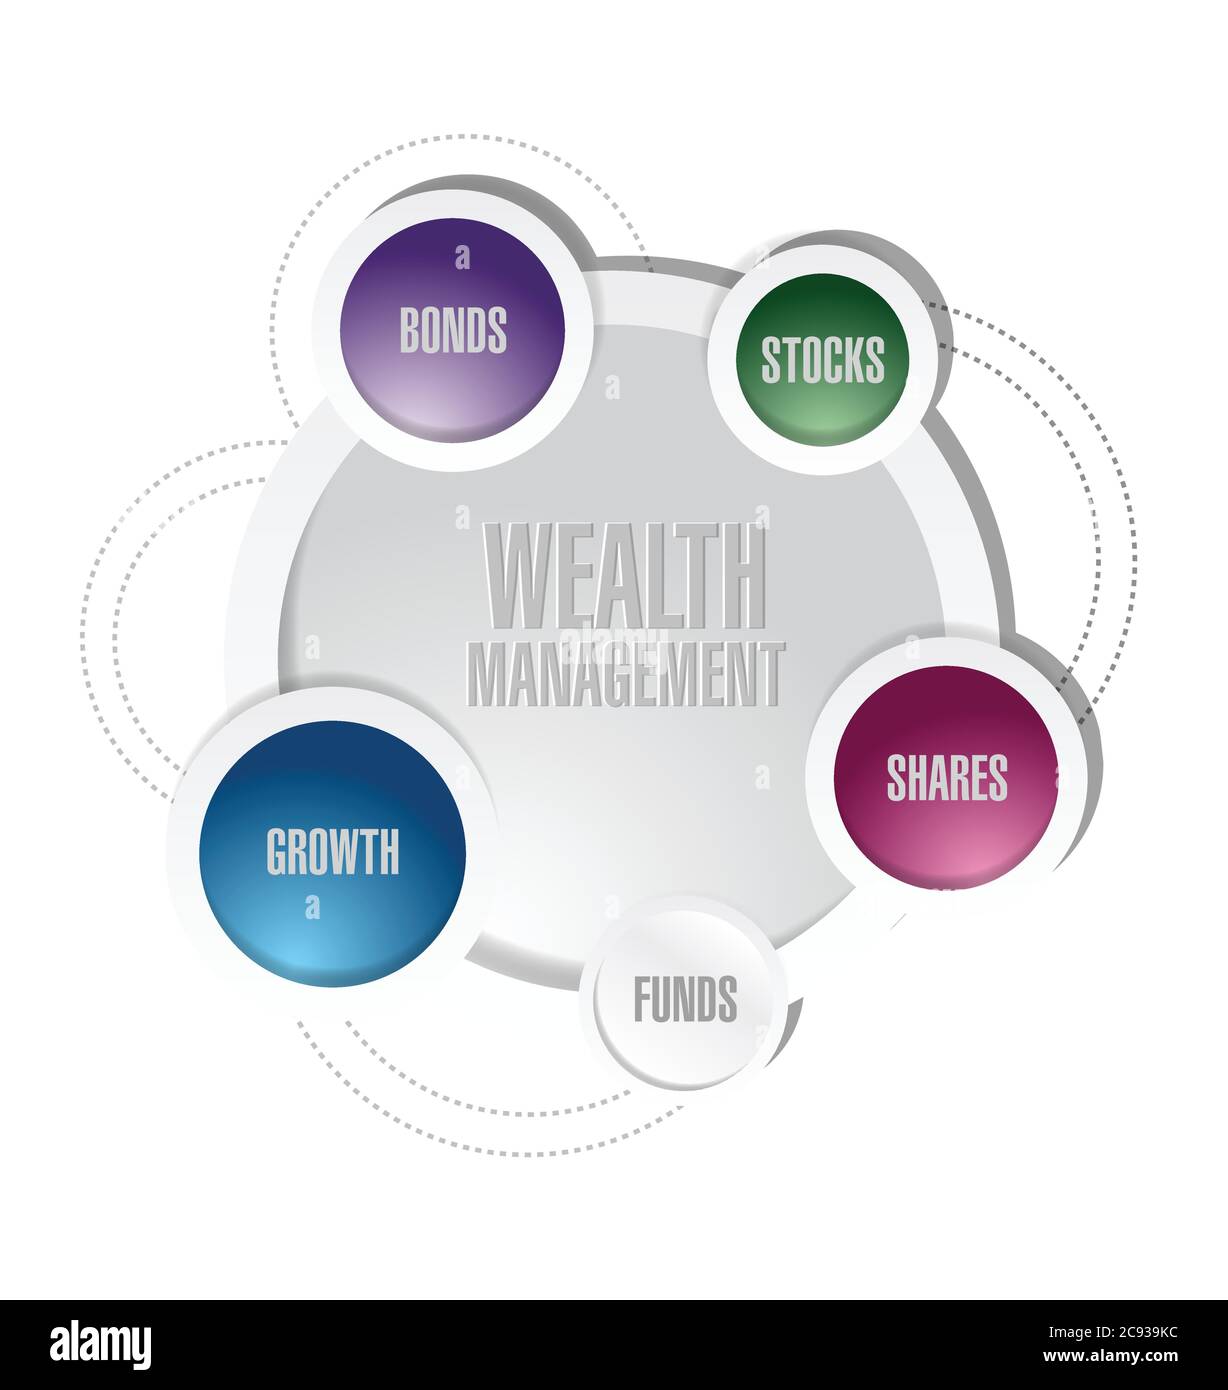 Wealth management cycle diagram illustration design over a white background Stock Vector